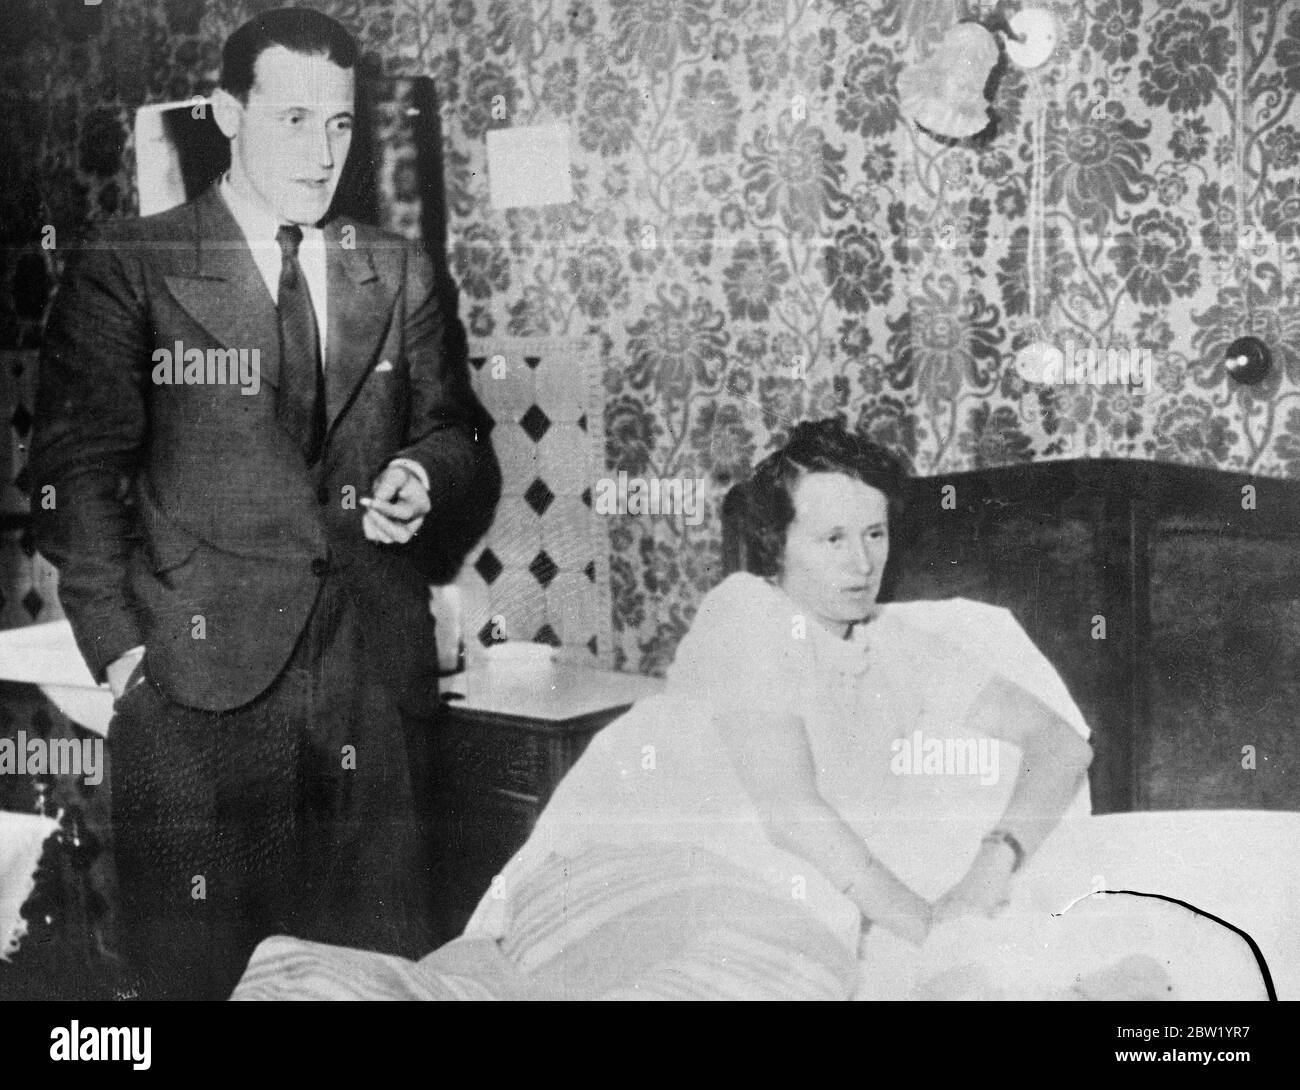 German girl at Paris Exposition ordered home after romance with a Swiss man. FrÃ¤ulein Herta Rost, aged 27, lying in bed in distress after she has been ordered to return at once to Berlin because the pavilion directors do not approve of her romance with a young Swiss businessman .With her is her Swiss fiance, Jan Bopp who has been questioned by Paris police and said he would marry her as soon as possible to give her Swiss nationality. 18 June 1937 Stock Photo